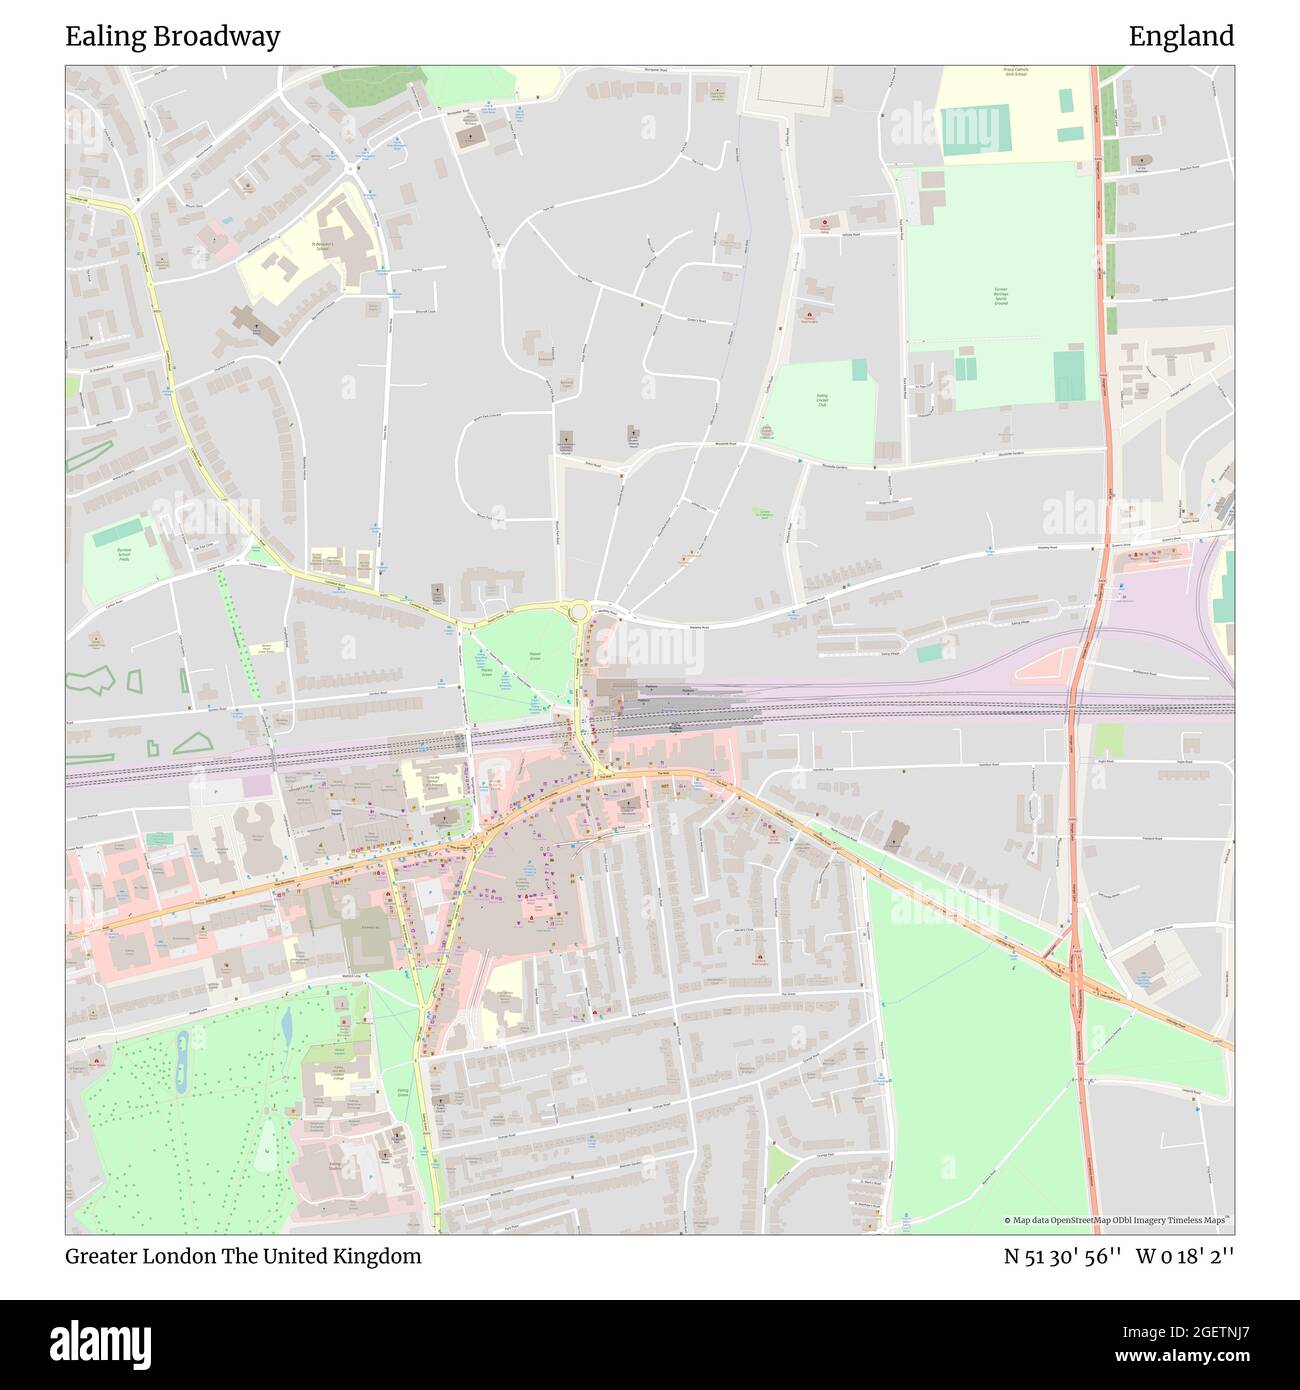 Ealing Broadway, Greater London, United Kingdom, England, N 51 30' 56'', W  0 18' 2'', map, Timeless Map published in 2021. Travelers, explorers and  adventurers like Florence Nightingale, David Livingstone, Ernest Shackleton,